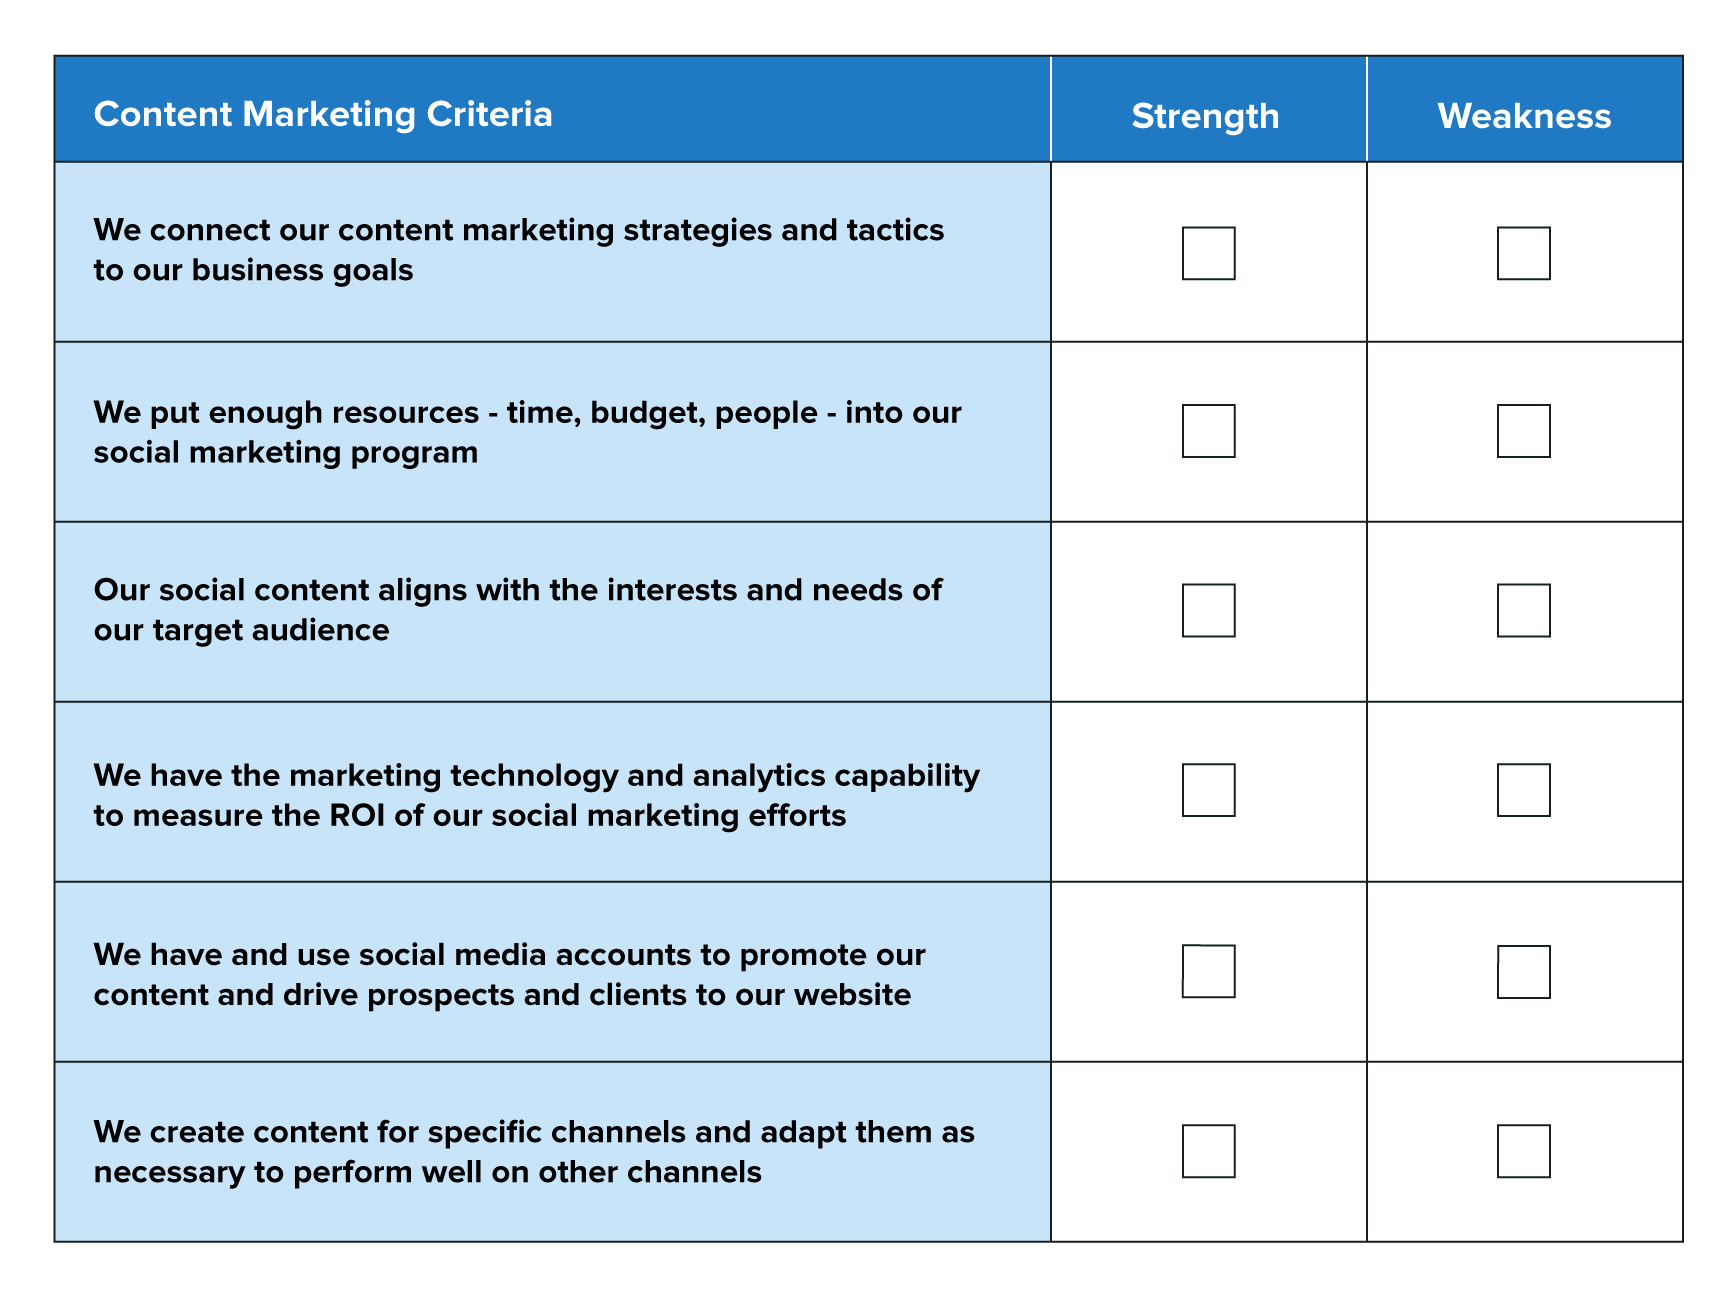 A chart to help marketers assess their strengths and weaknesses when it comes to content marketing.